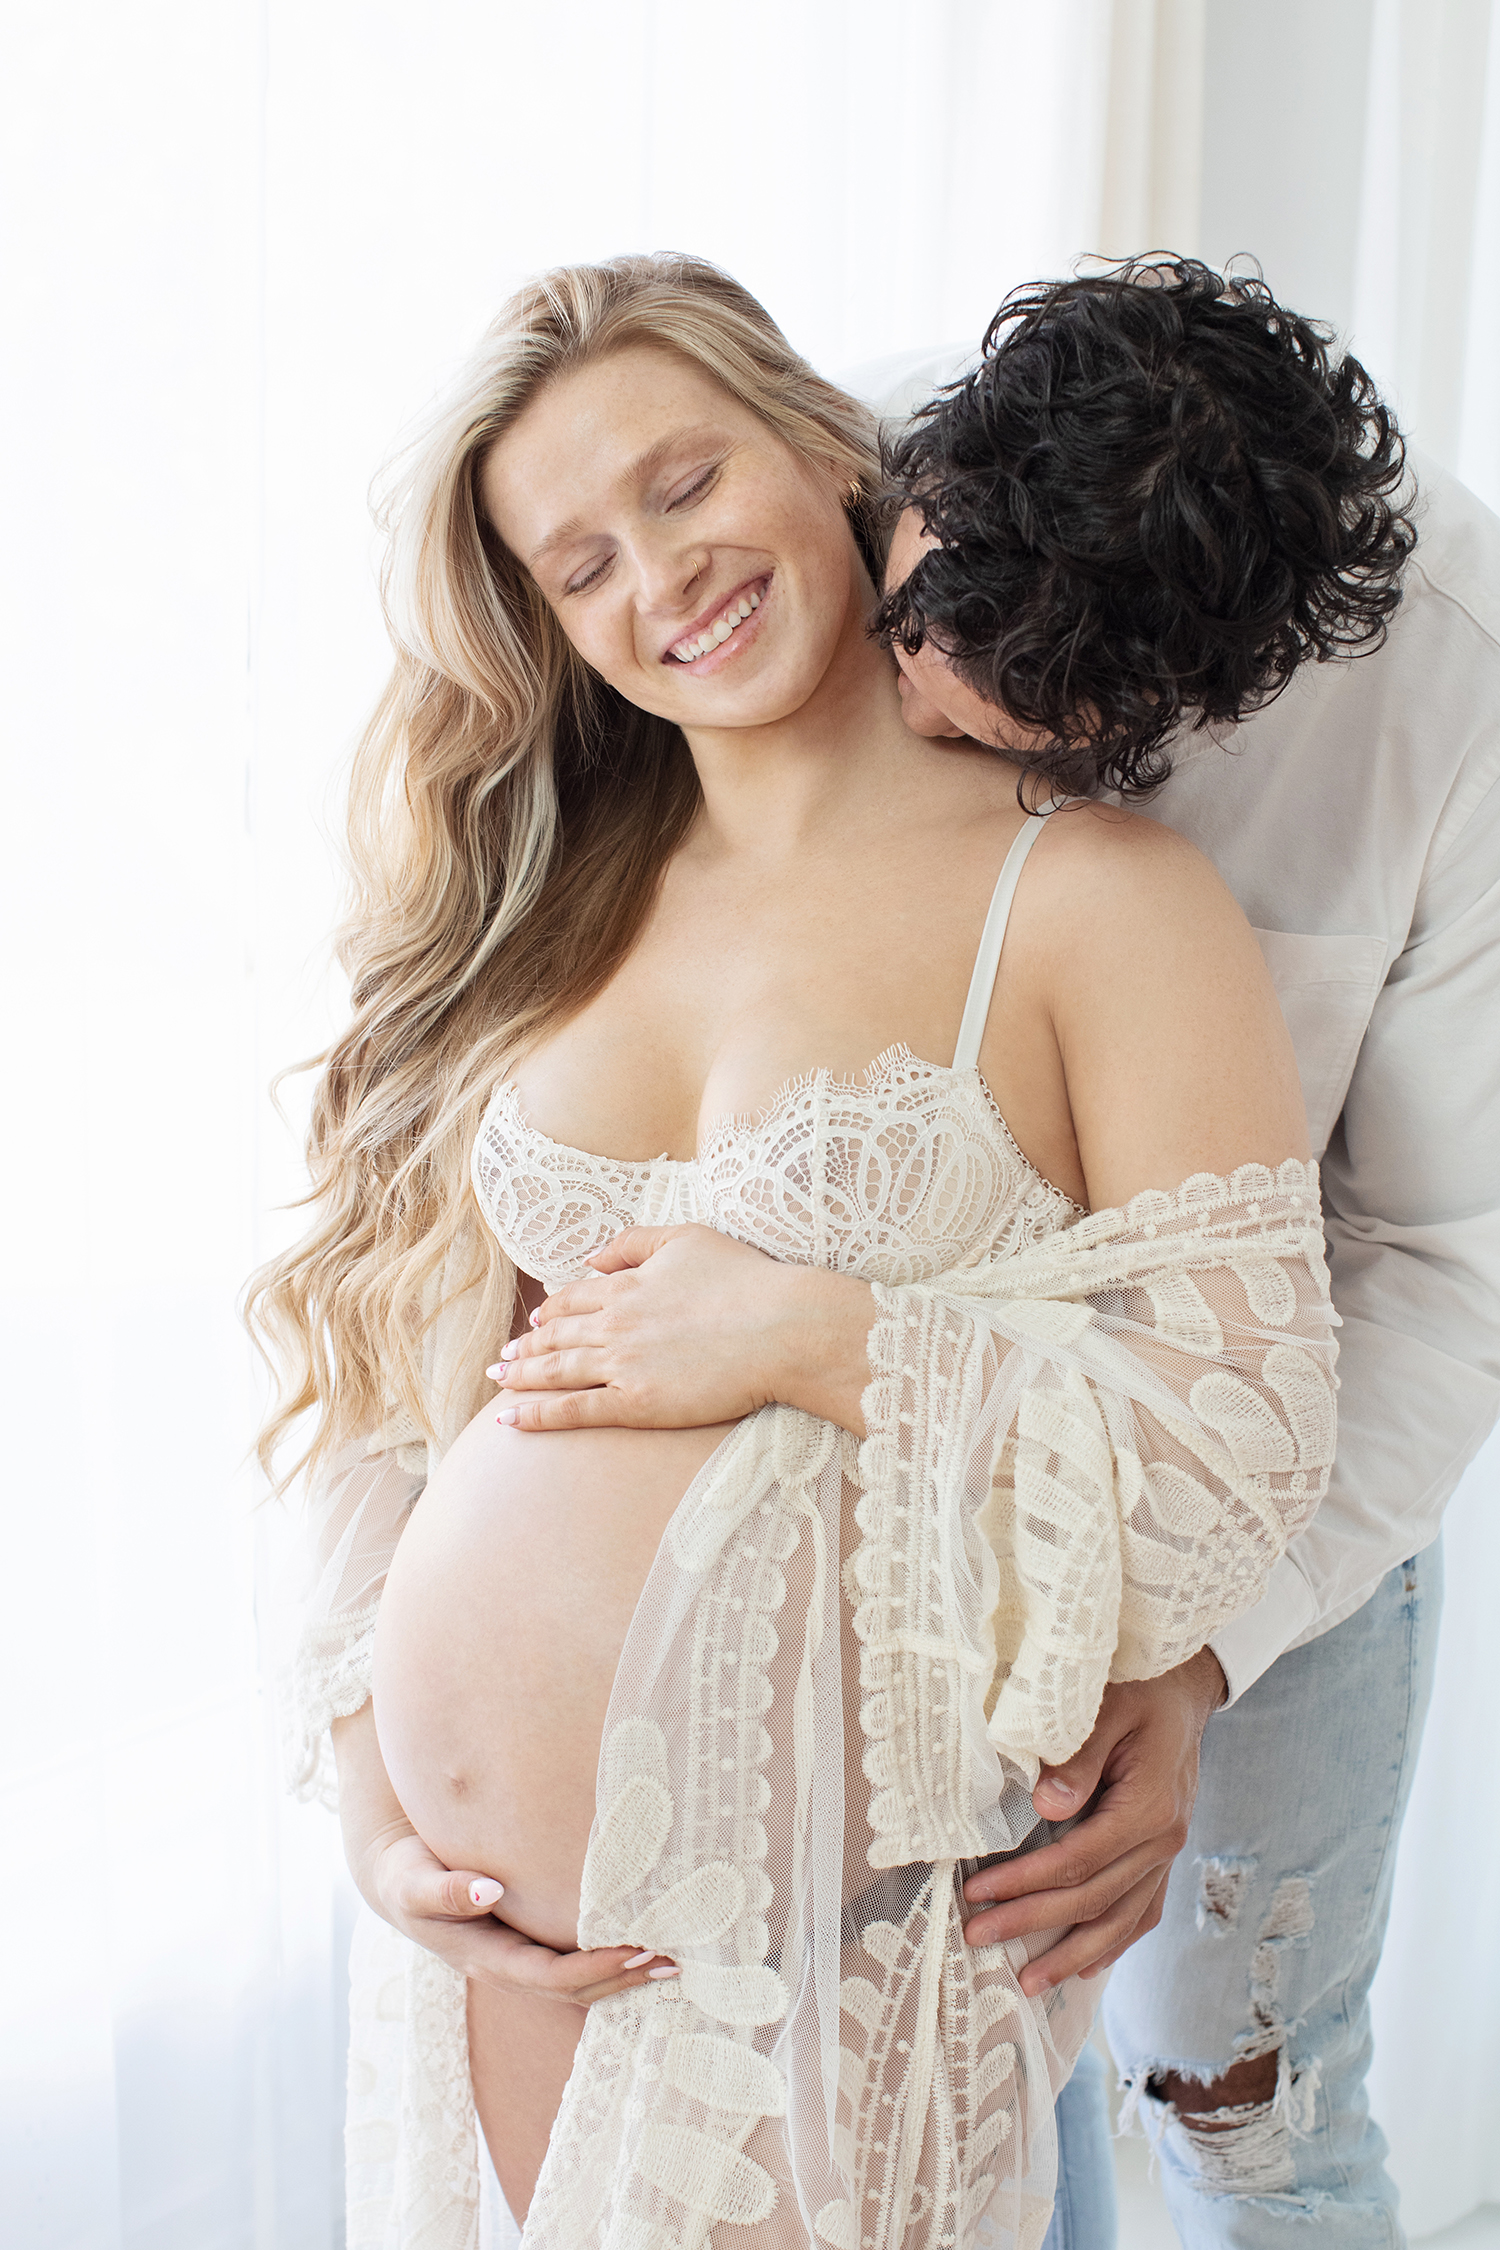 A pregnant woman cuddles with her husband.